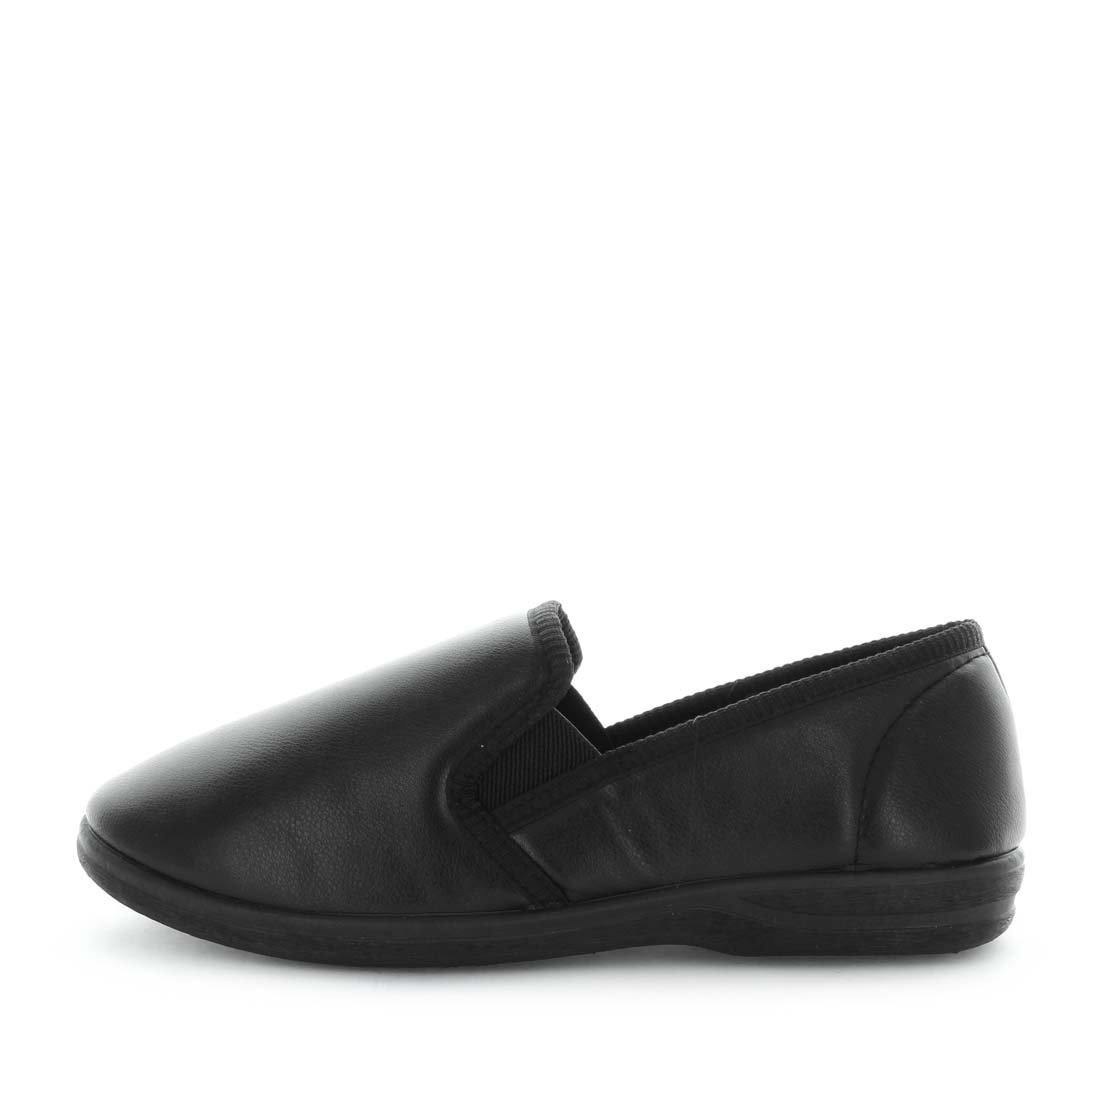 Classic mens slip on slipper, Edword by panda slippers. A black mens slipper made with soft materials and comfy fit design for the perfect indoor slipper.